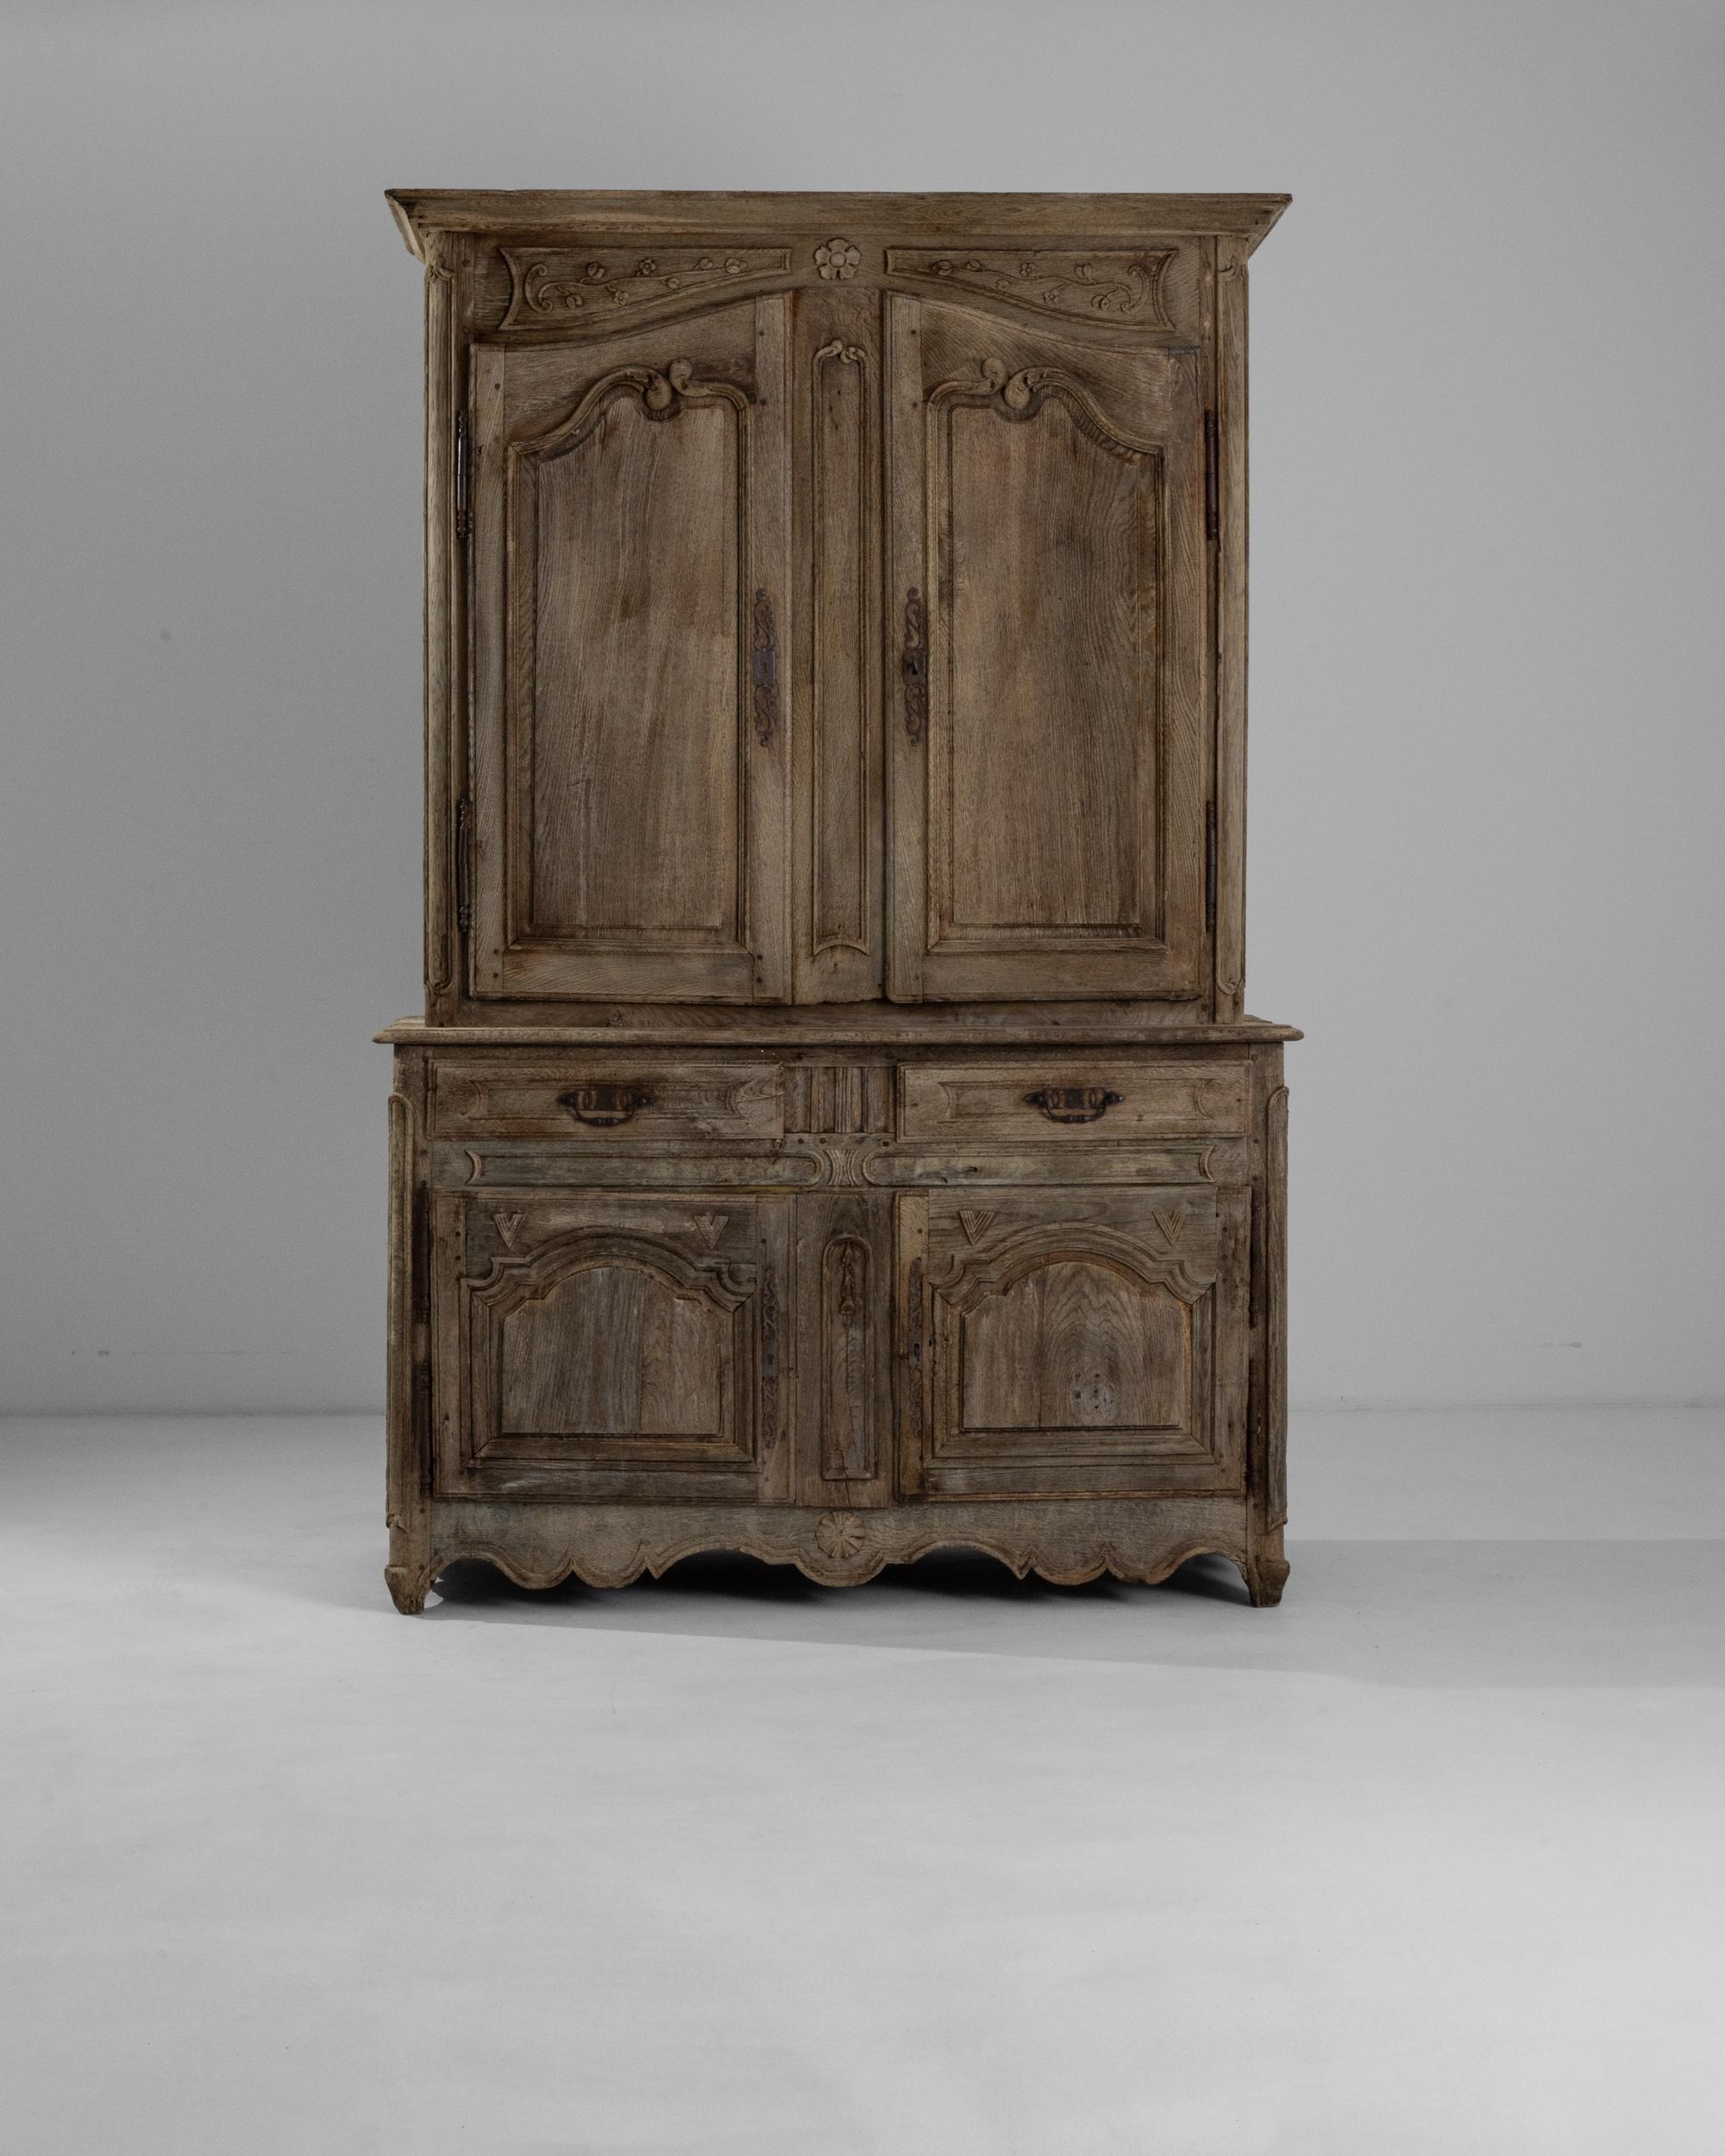 Verdant and romantic, this antique oak cabinet blossoms with floral details. Built in 19th century France, the simple provincial silhouette is enlivened by intricate carvings: a daisy blooms from the center of the contoured apron, the lines of the